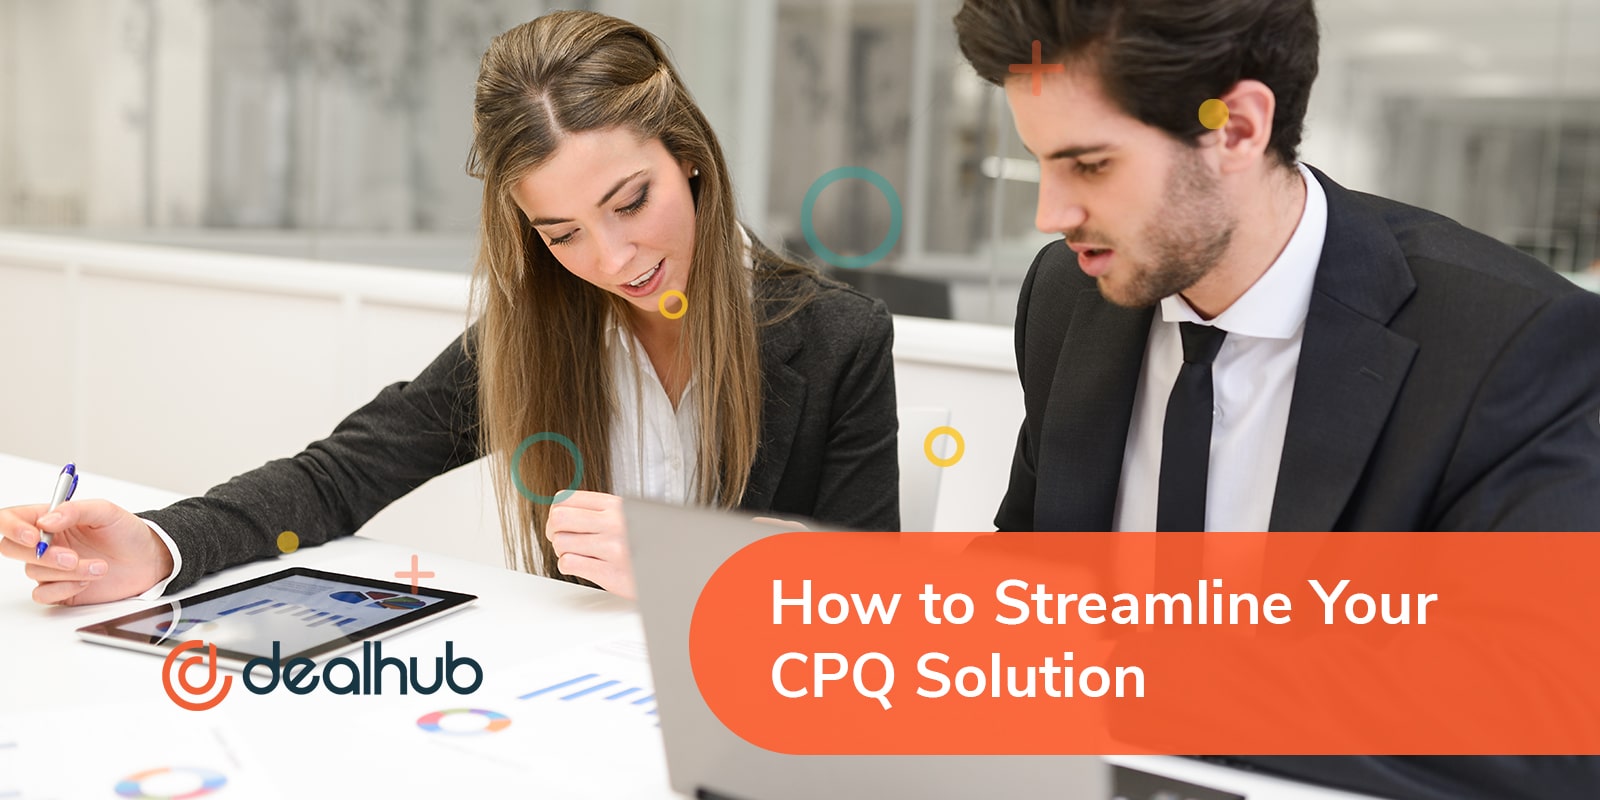 How to Streamline Your CPQ Solution